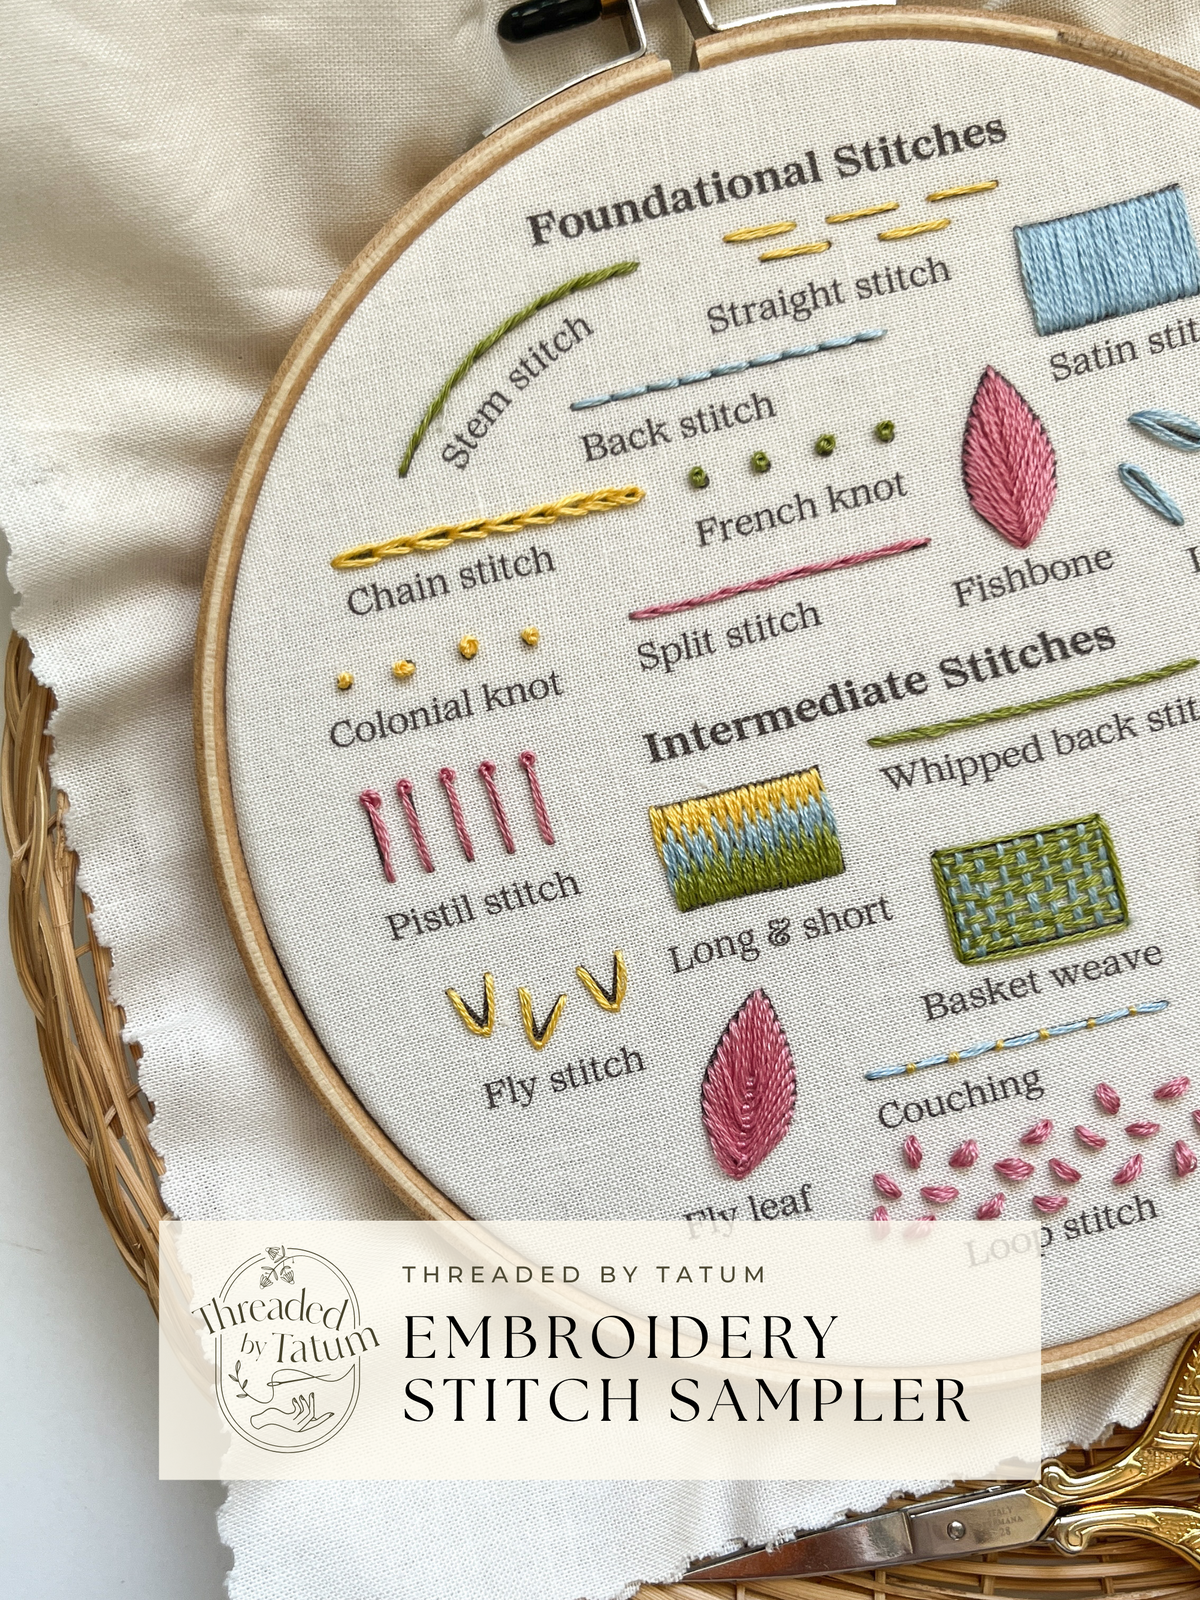 Anchor Essentials: Honeycomb Stitch Sampler Embroidery Kit